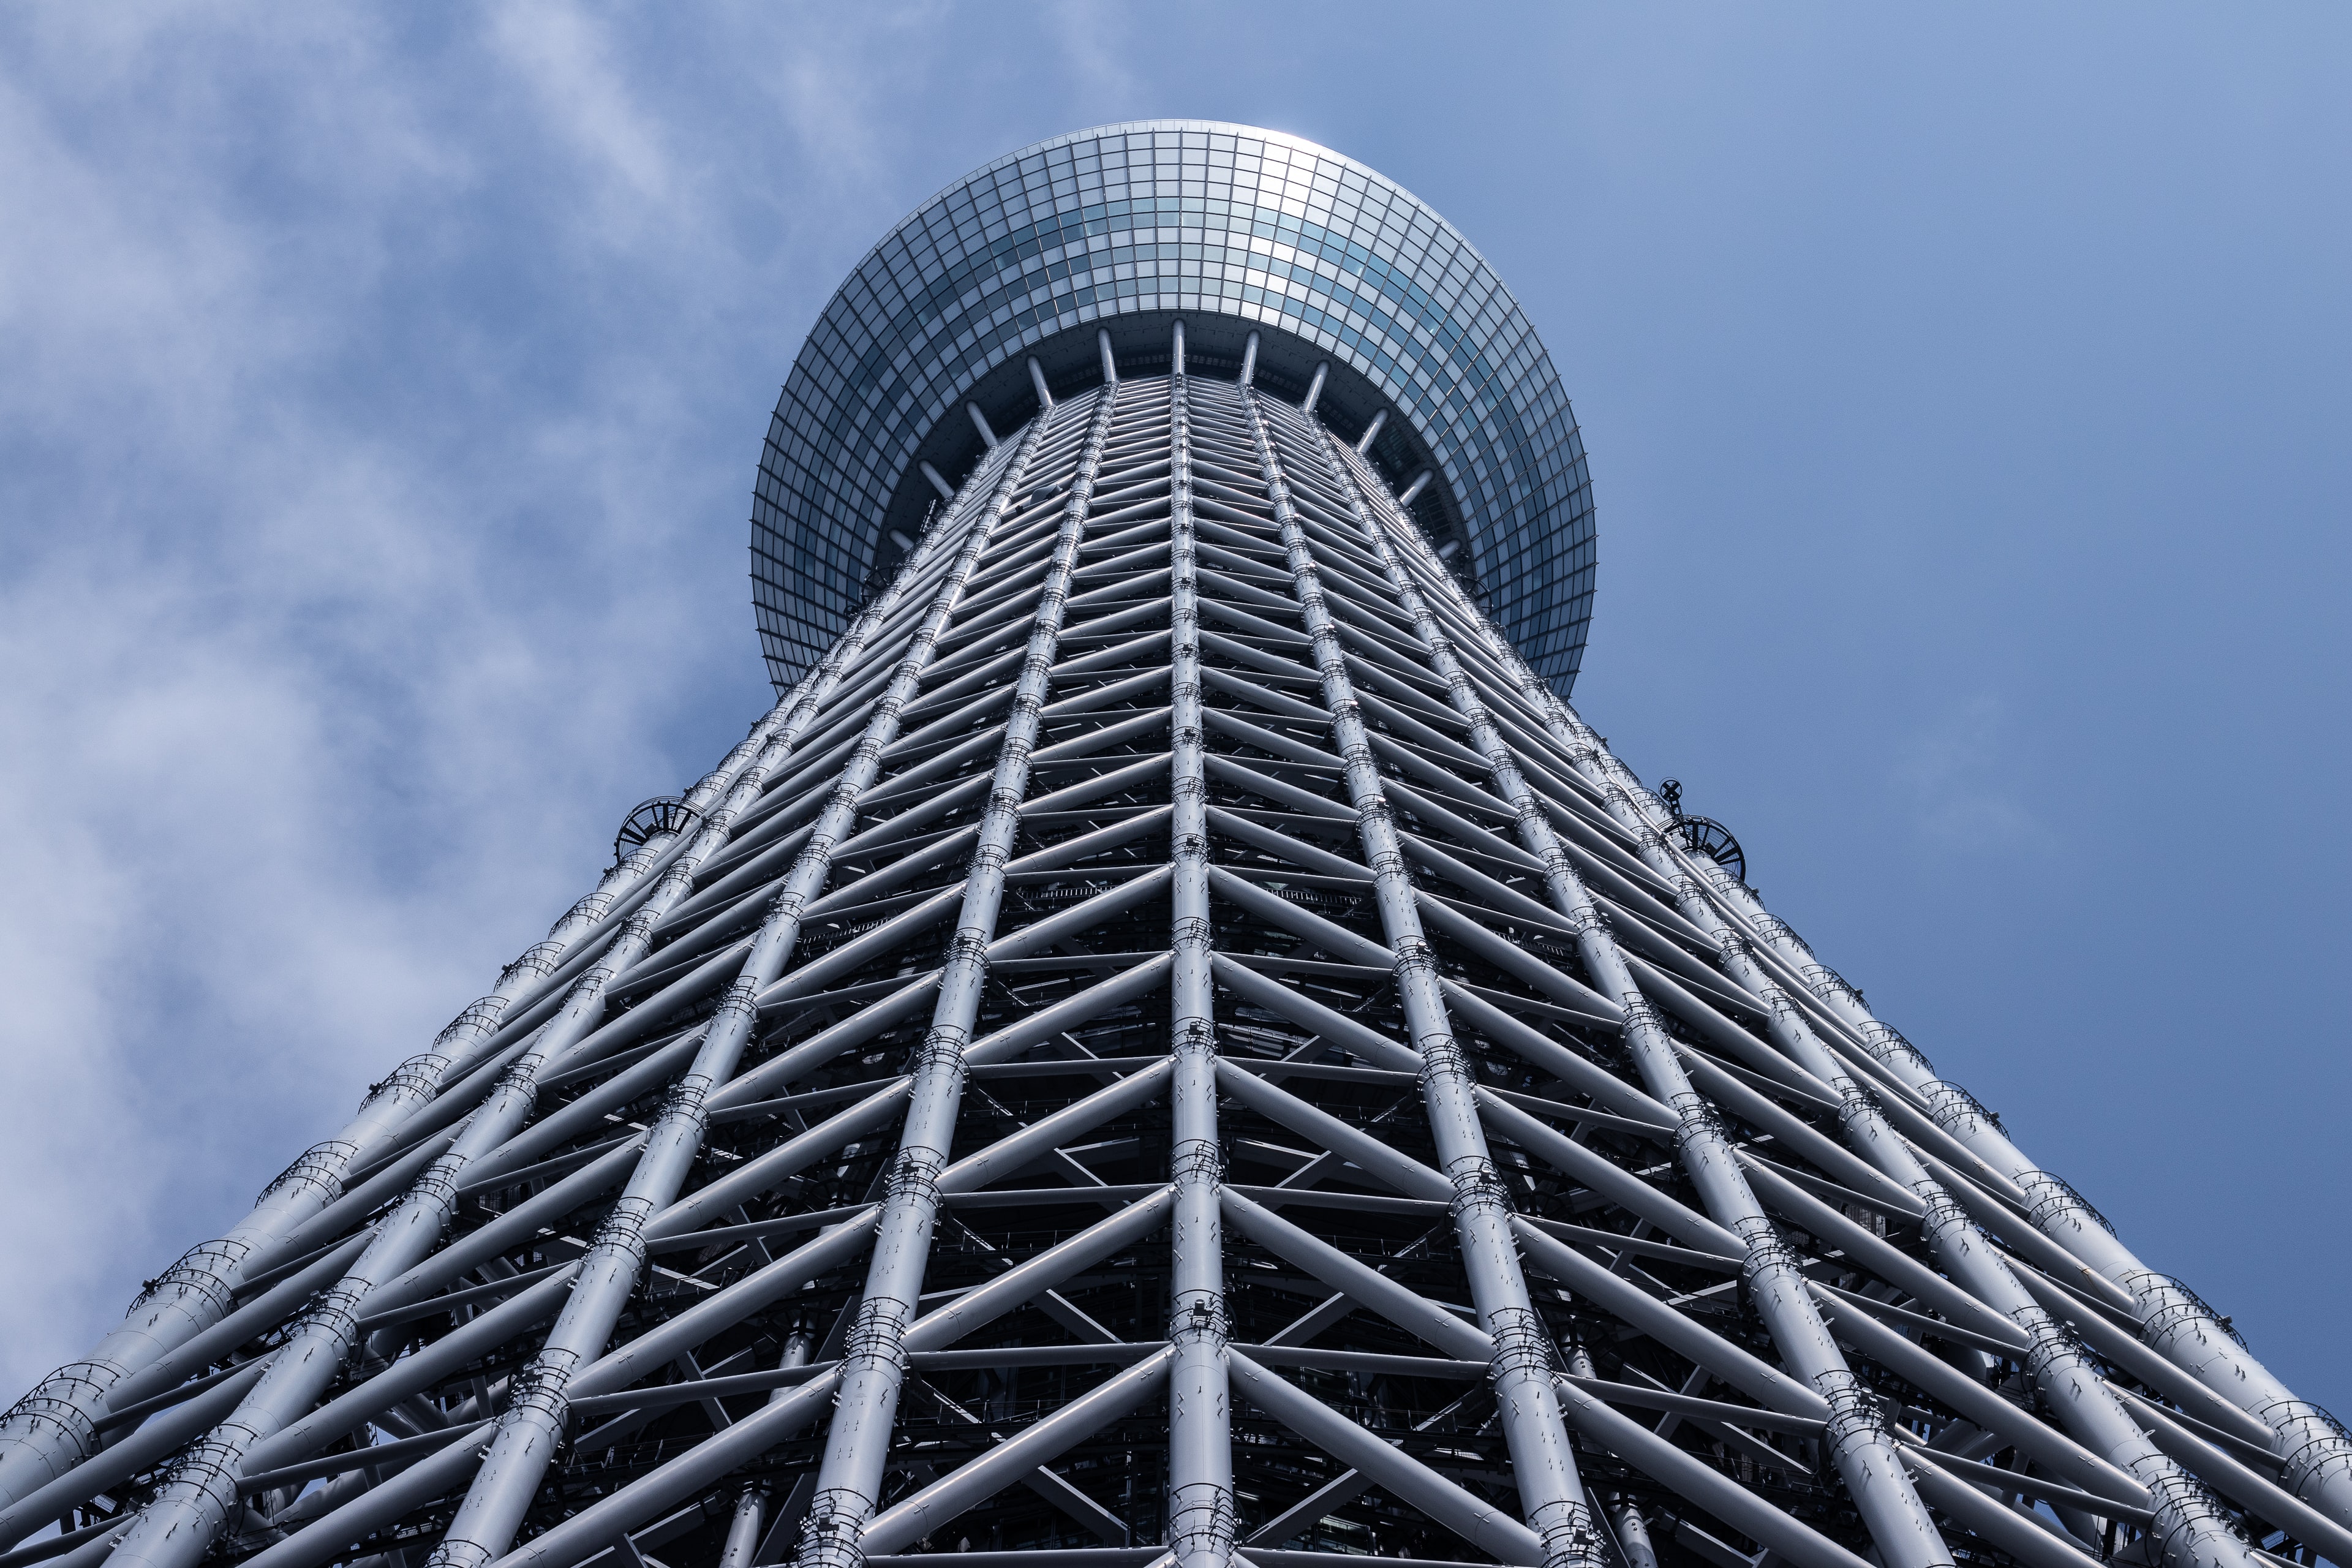 The Skytree tower built in 2013 in Tokyo has earthquake-resistant structures (Source: Robby McCullough/ Unsplash)